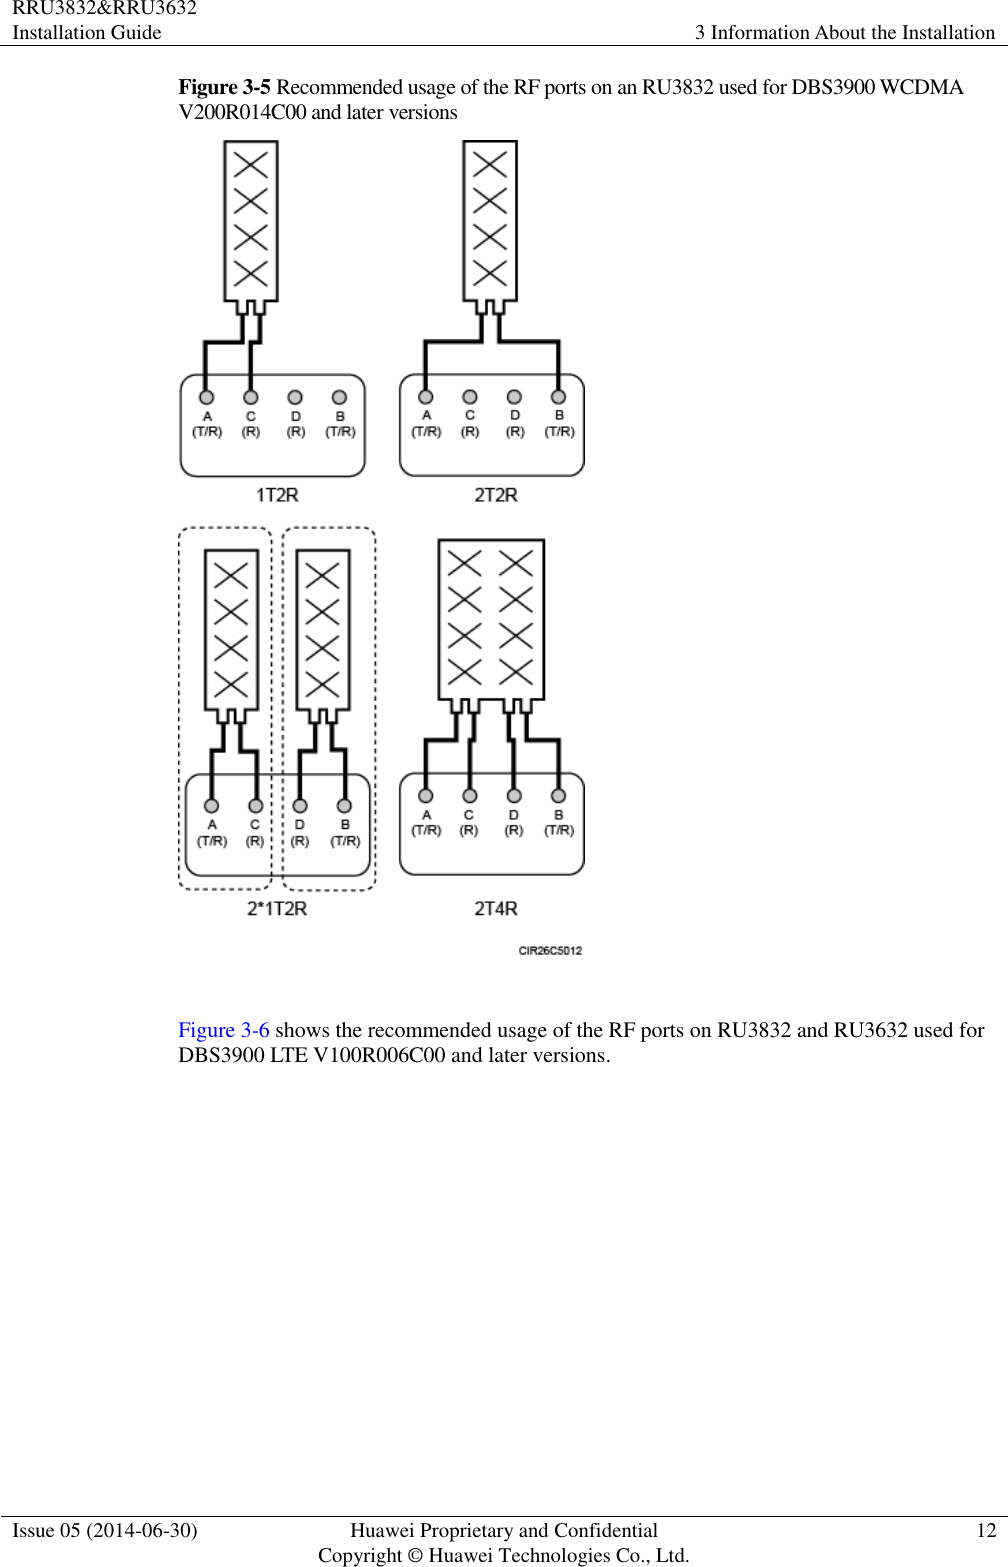 RRU3832&amp;RRU3632 Installation Guide 3 Information About the Installation  Issue 05 (2014-06-30) Huawei Proprietary and Confidential                                     Copyright © Huawei Technologies Co., Ltd. 12  Figure 3-5 Recommended usage of the RF ports on an RU3832 used for DBS3900 WCDMA V200R014C00 and later versions   Figure 3-6 shows the recommended usage of the RF ports on RU3832 and RU3632 used for DBS3900 LTE V100R006C00 and later versions. 